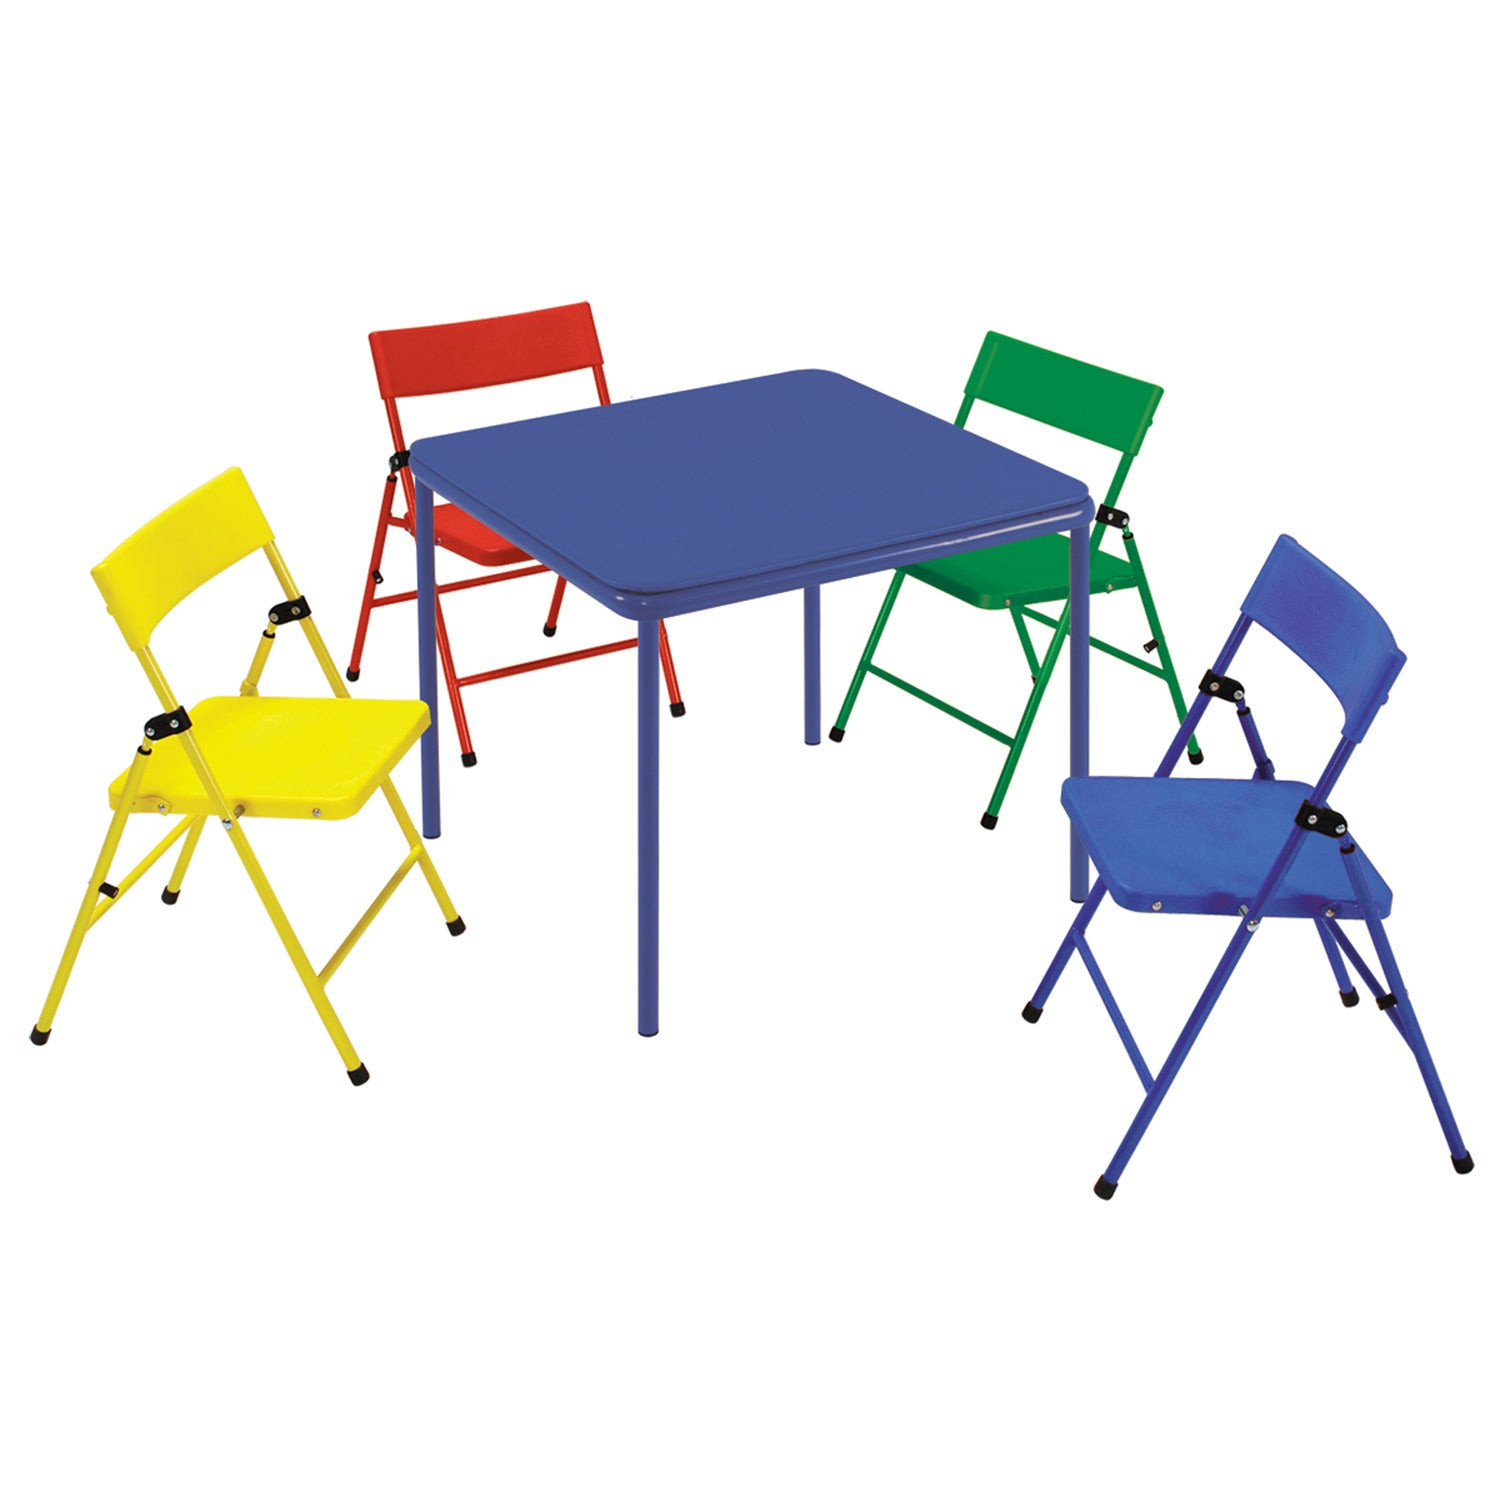 Folding Kids Table
 Cosco Kid s 5 piece Colored Folding Chair and Table Set